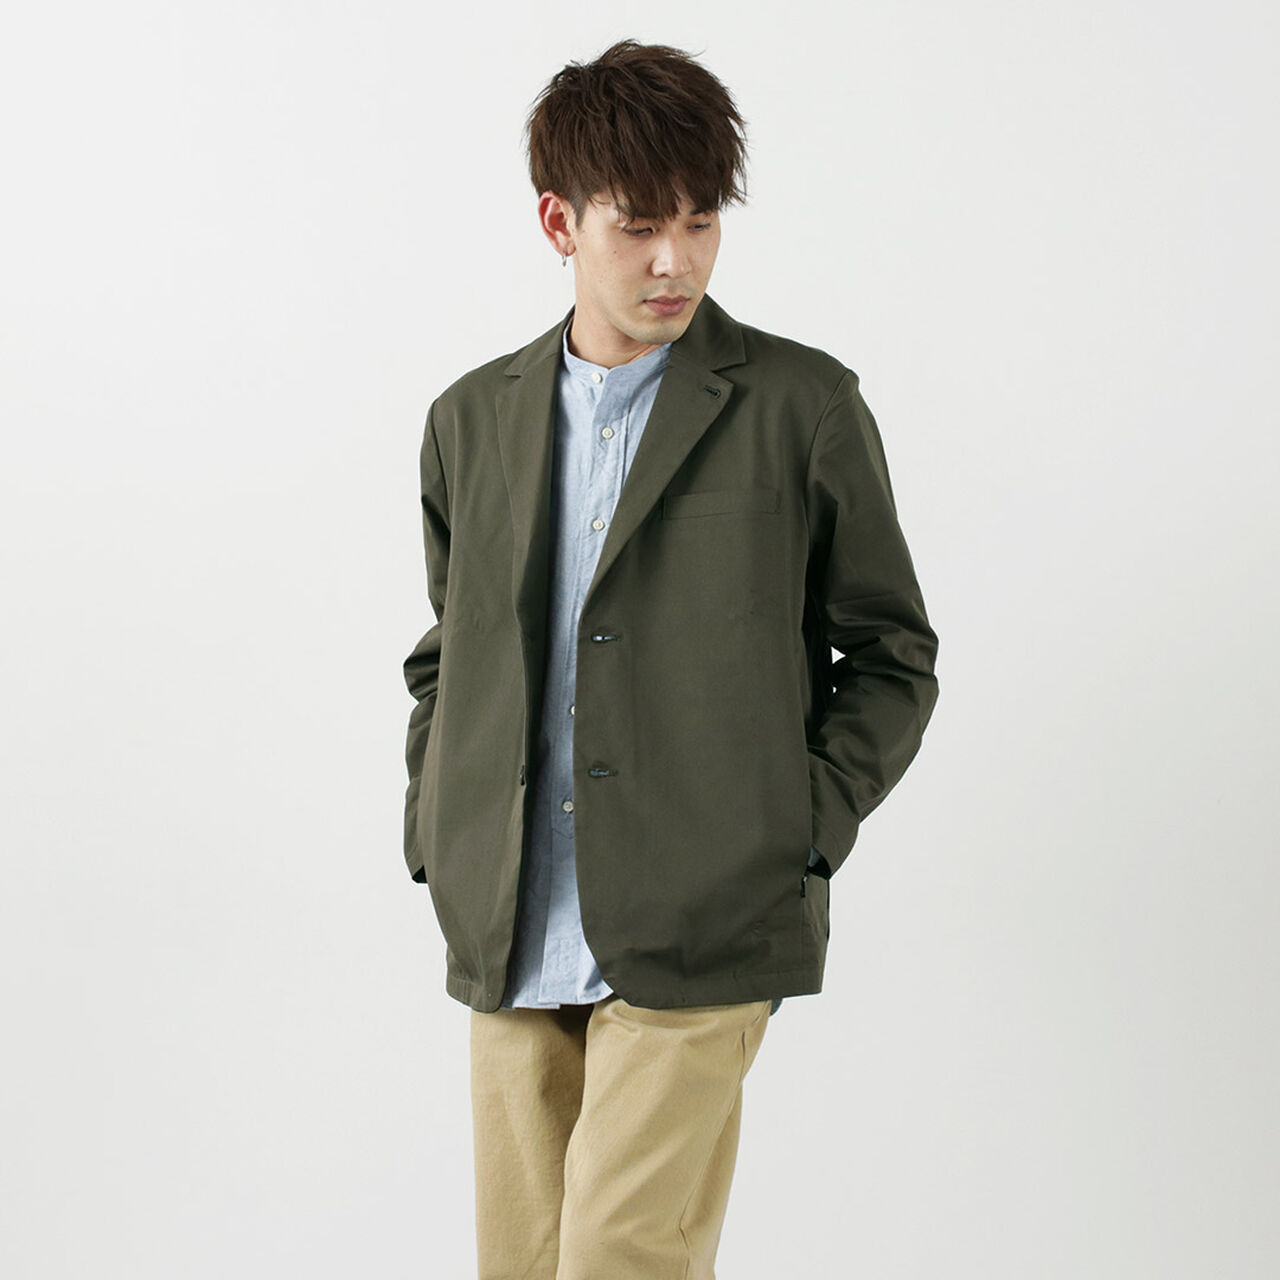 GO OUT Tailored Jacket,Olive, large image number 0